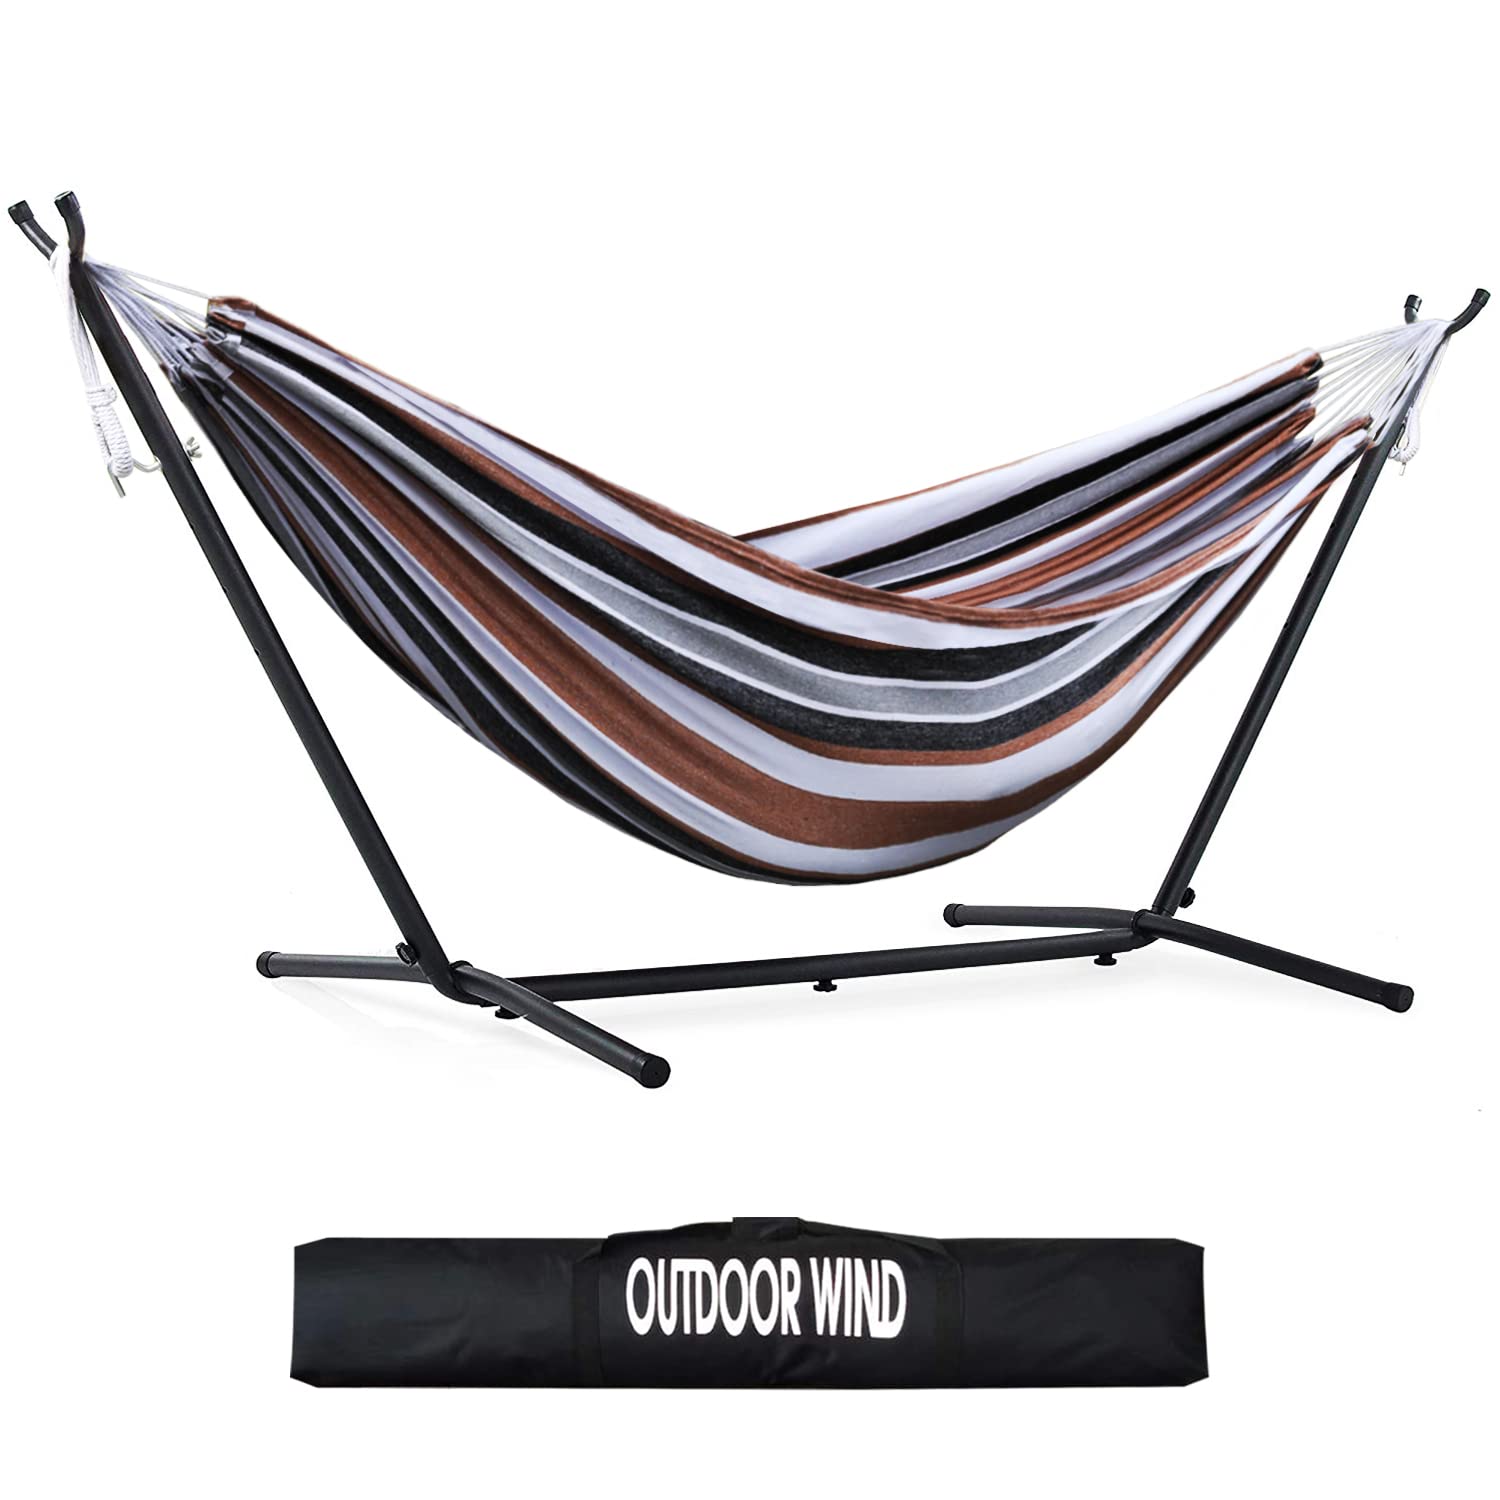 OUTDOOR WIND 550lbs capacity Double Hammock Adjustable Hammock Bed with 10ft Heavy Duty Steel Stand Includes Portable carrying c